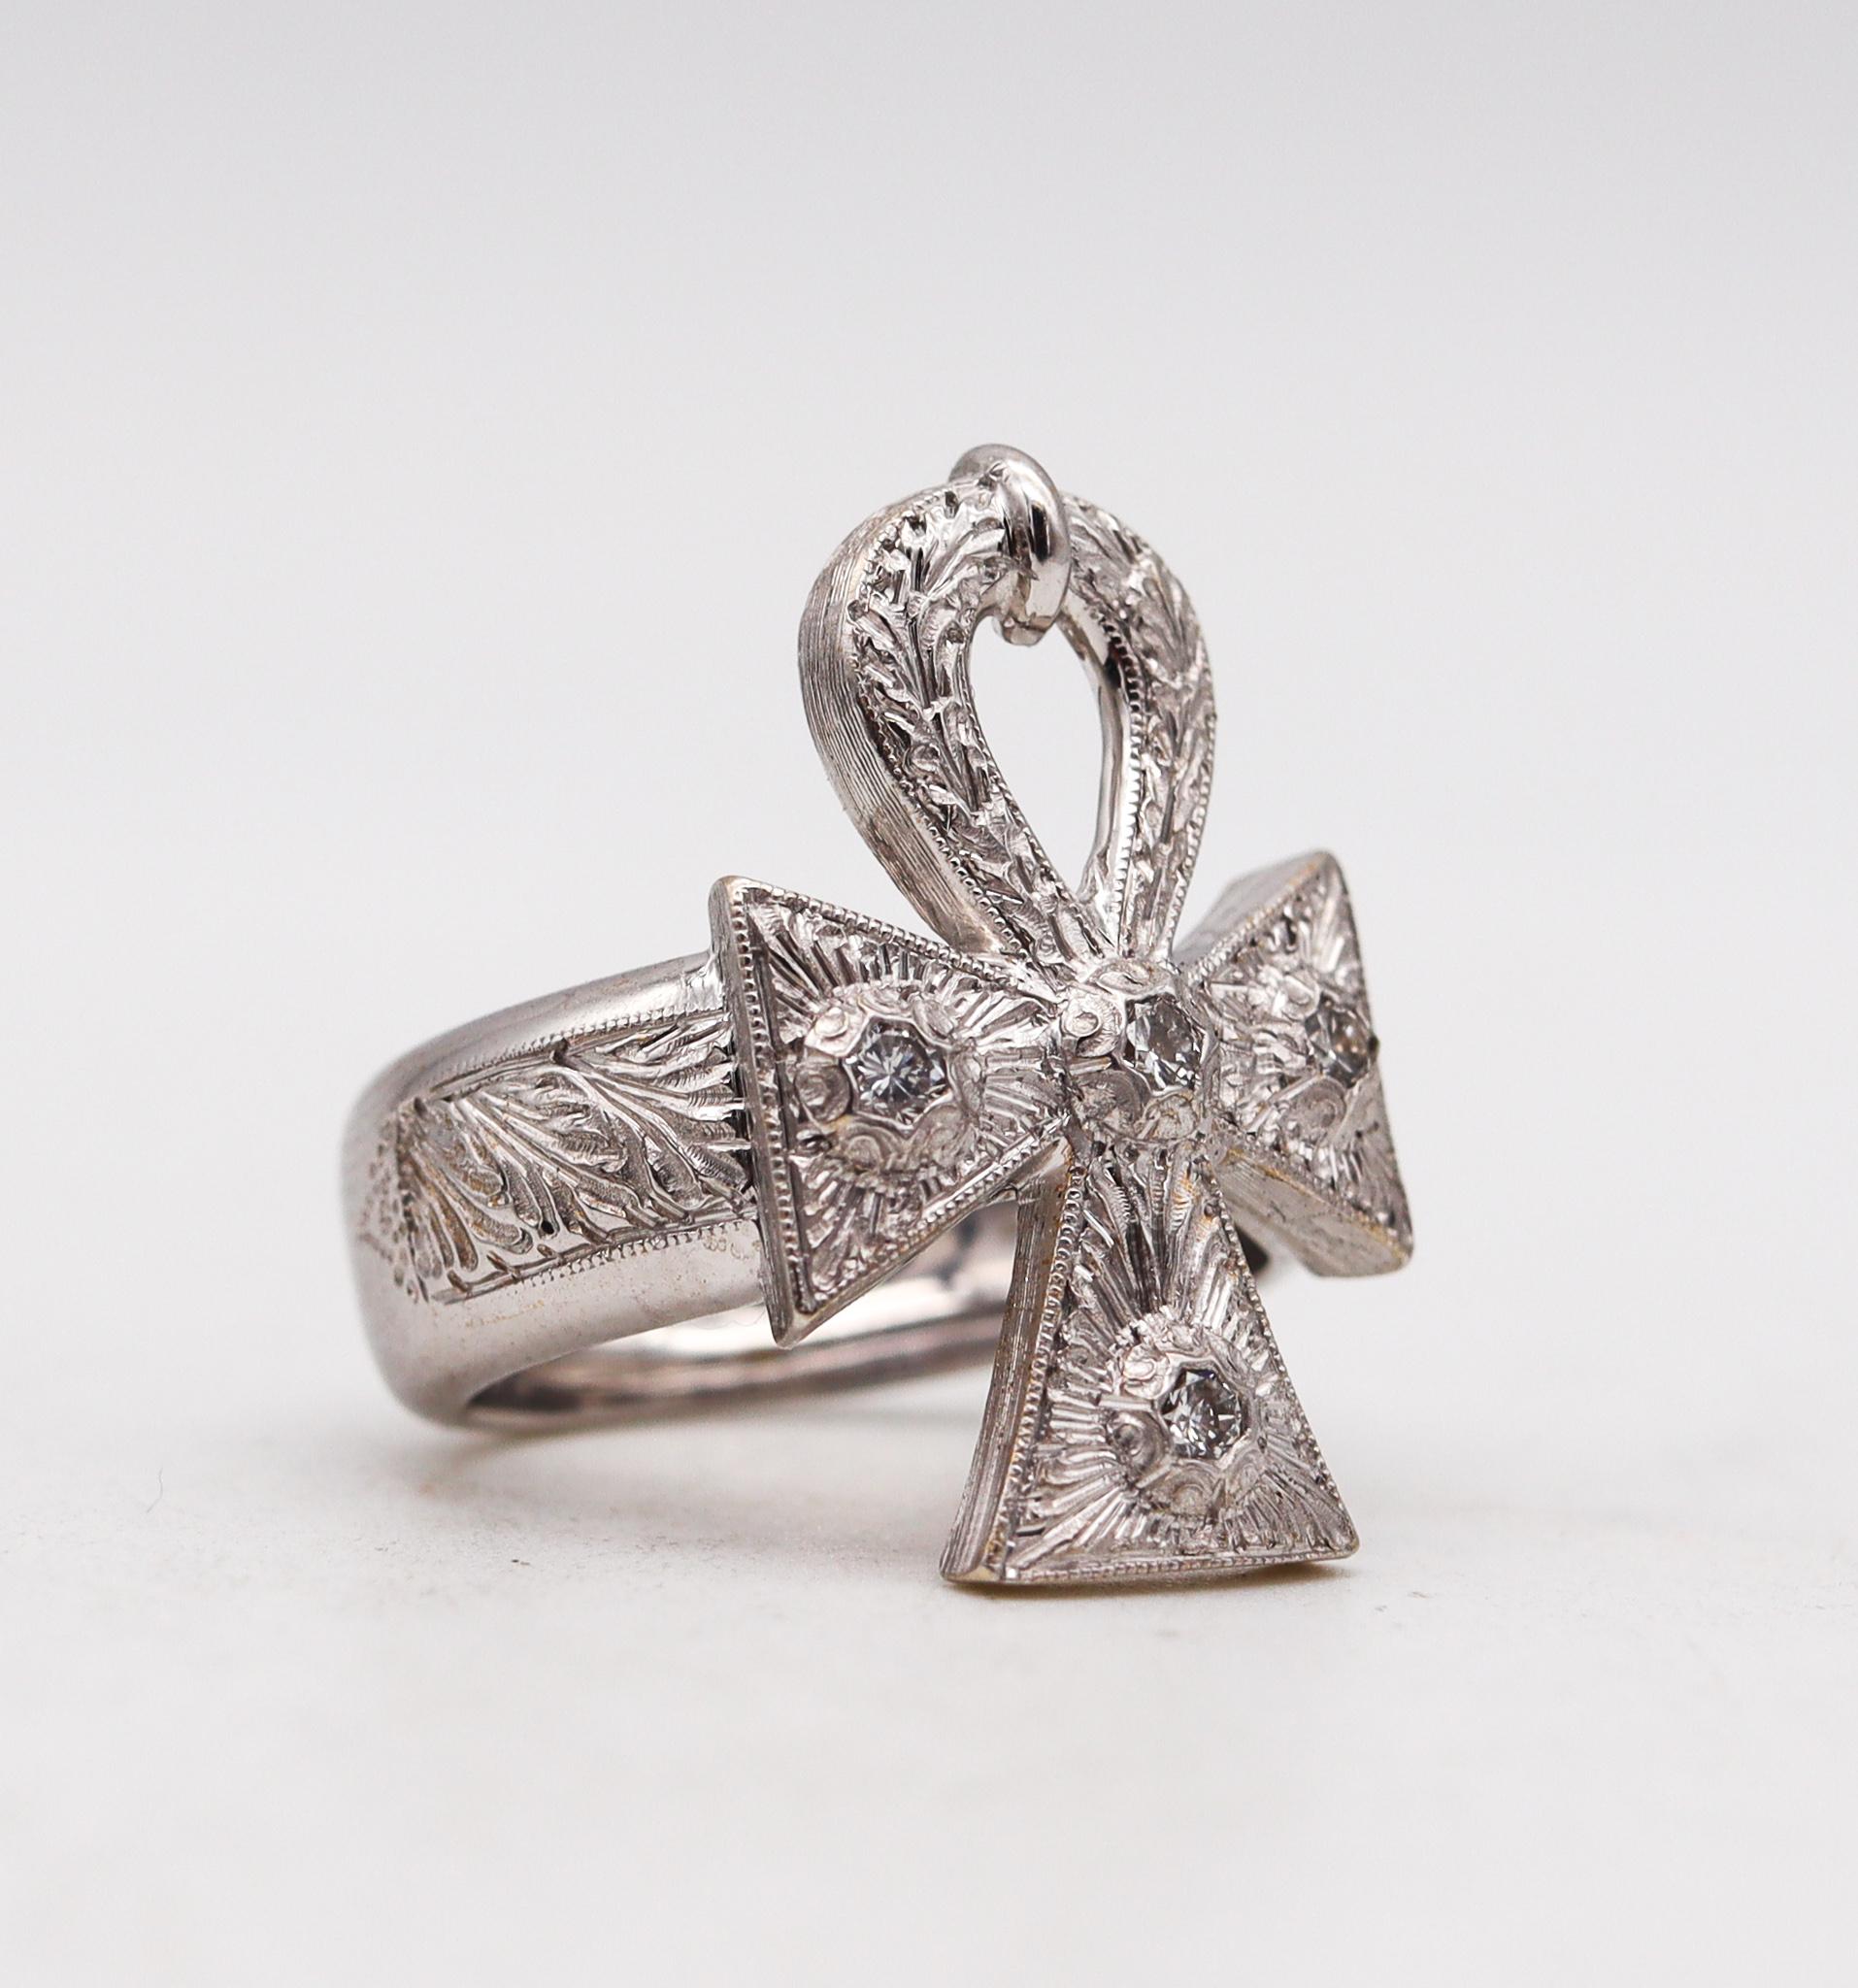 Baroque Revival Cazzaniga Roma Ankh Cocktail Ring in Solid 18Kt White Gold with VS Diamonds